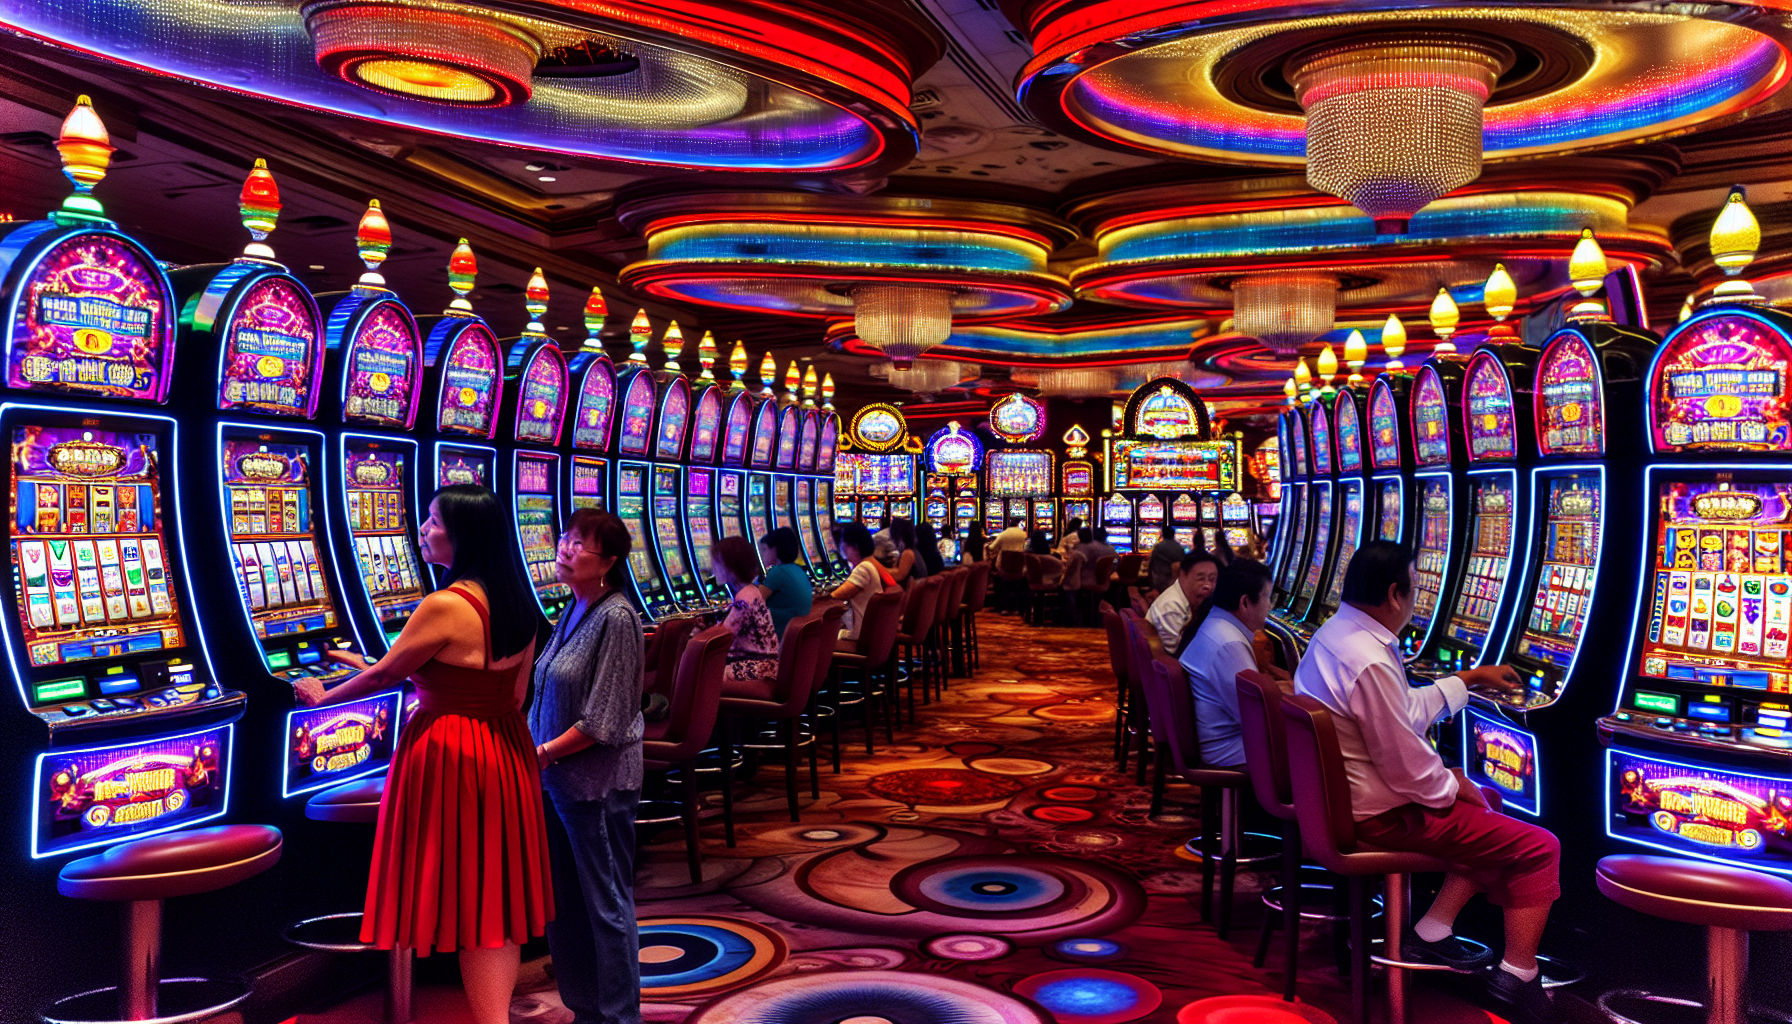 Top Casino for Slots - Image of colorful slot machines